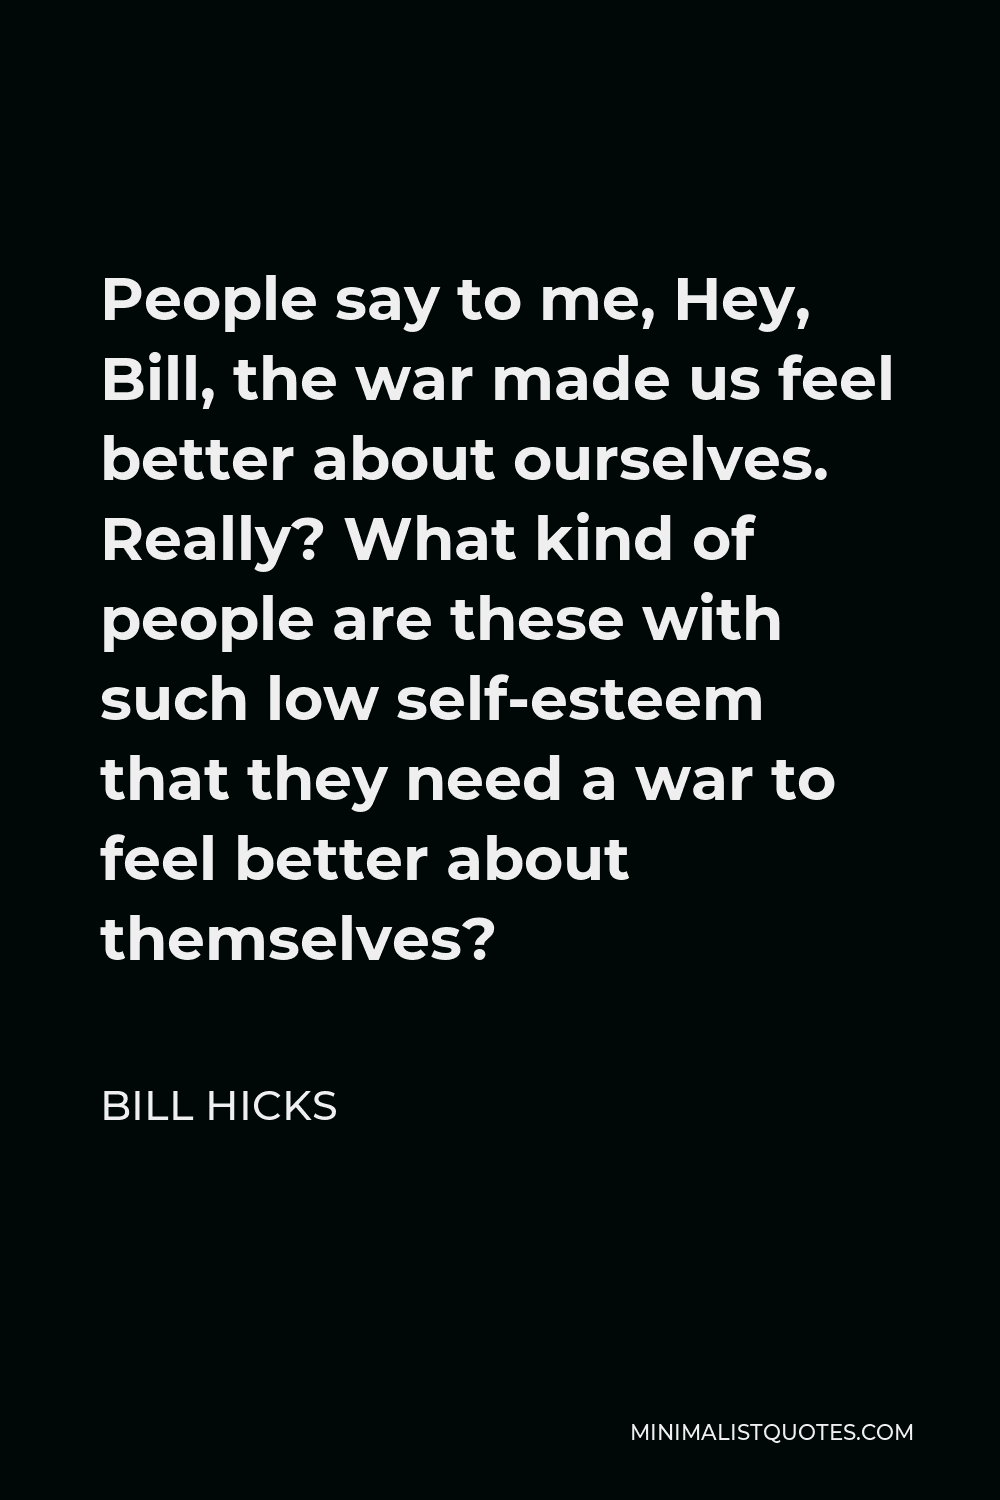 Bill Hicks Quote - People say to me, Hey, Bill, the war made us feel better about ourselves. Really? What kind of people are these with such low self-esteem that they need a war to feel better about themselves?